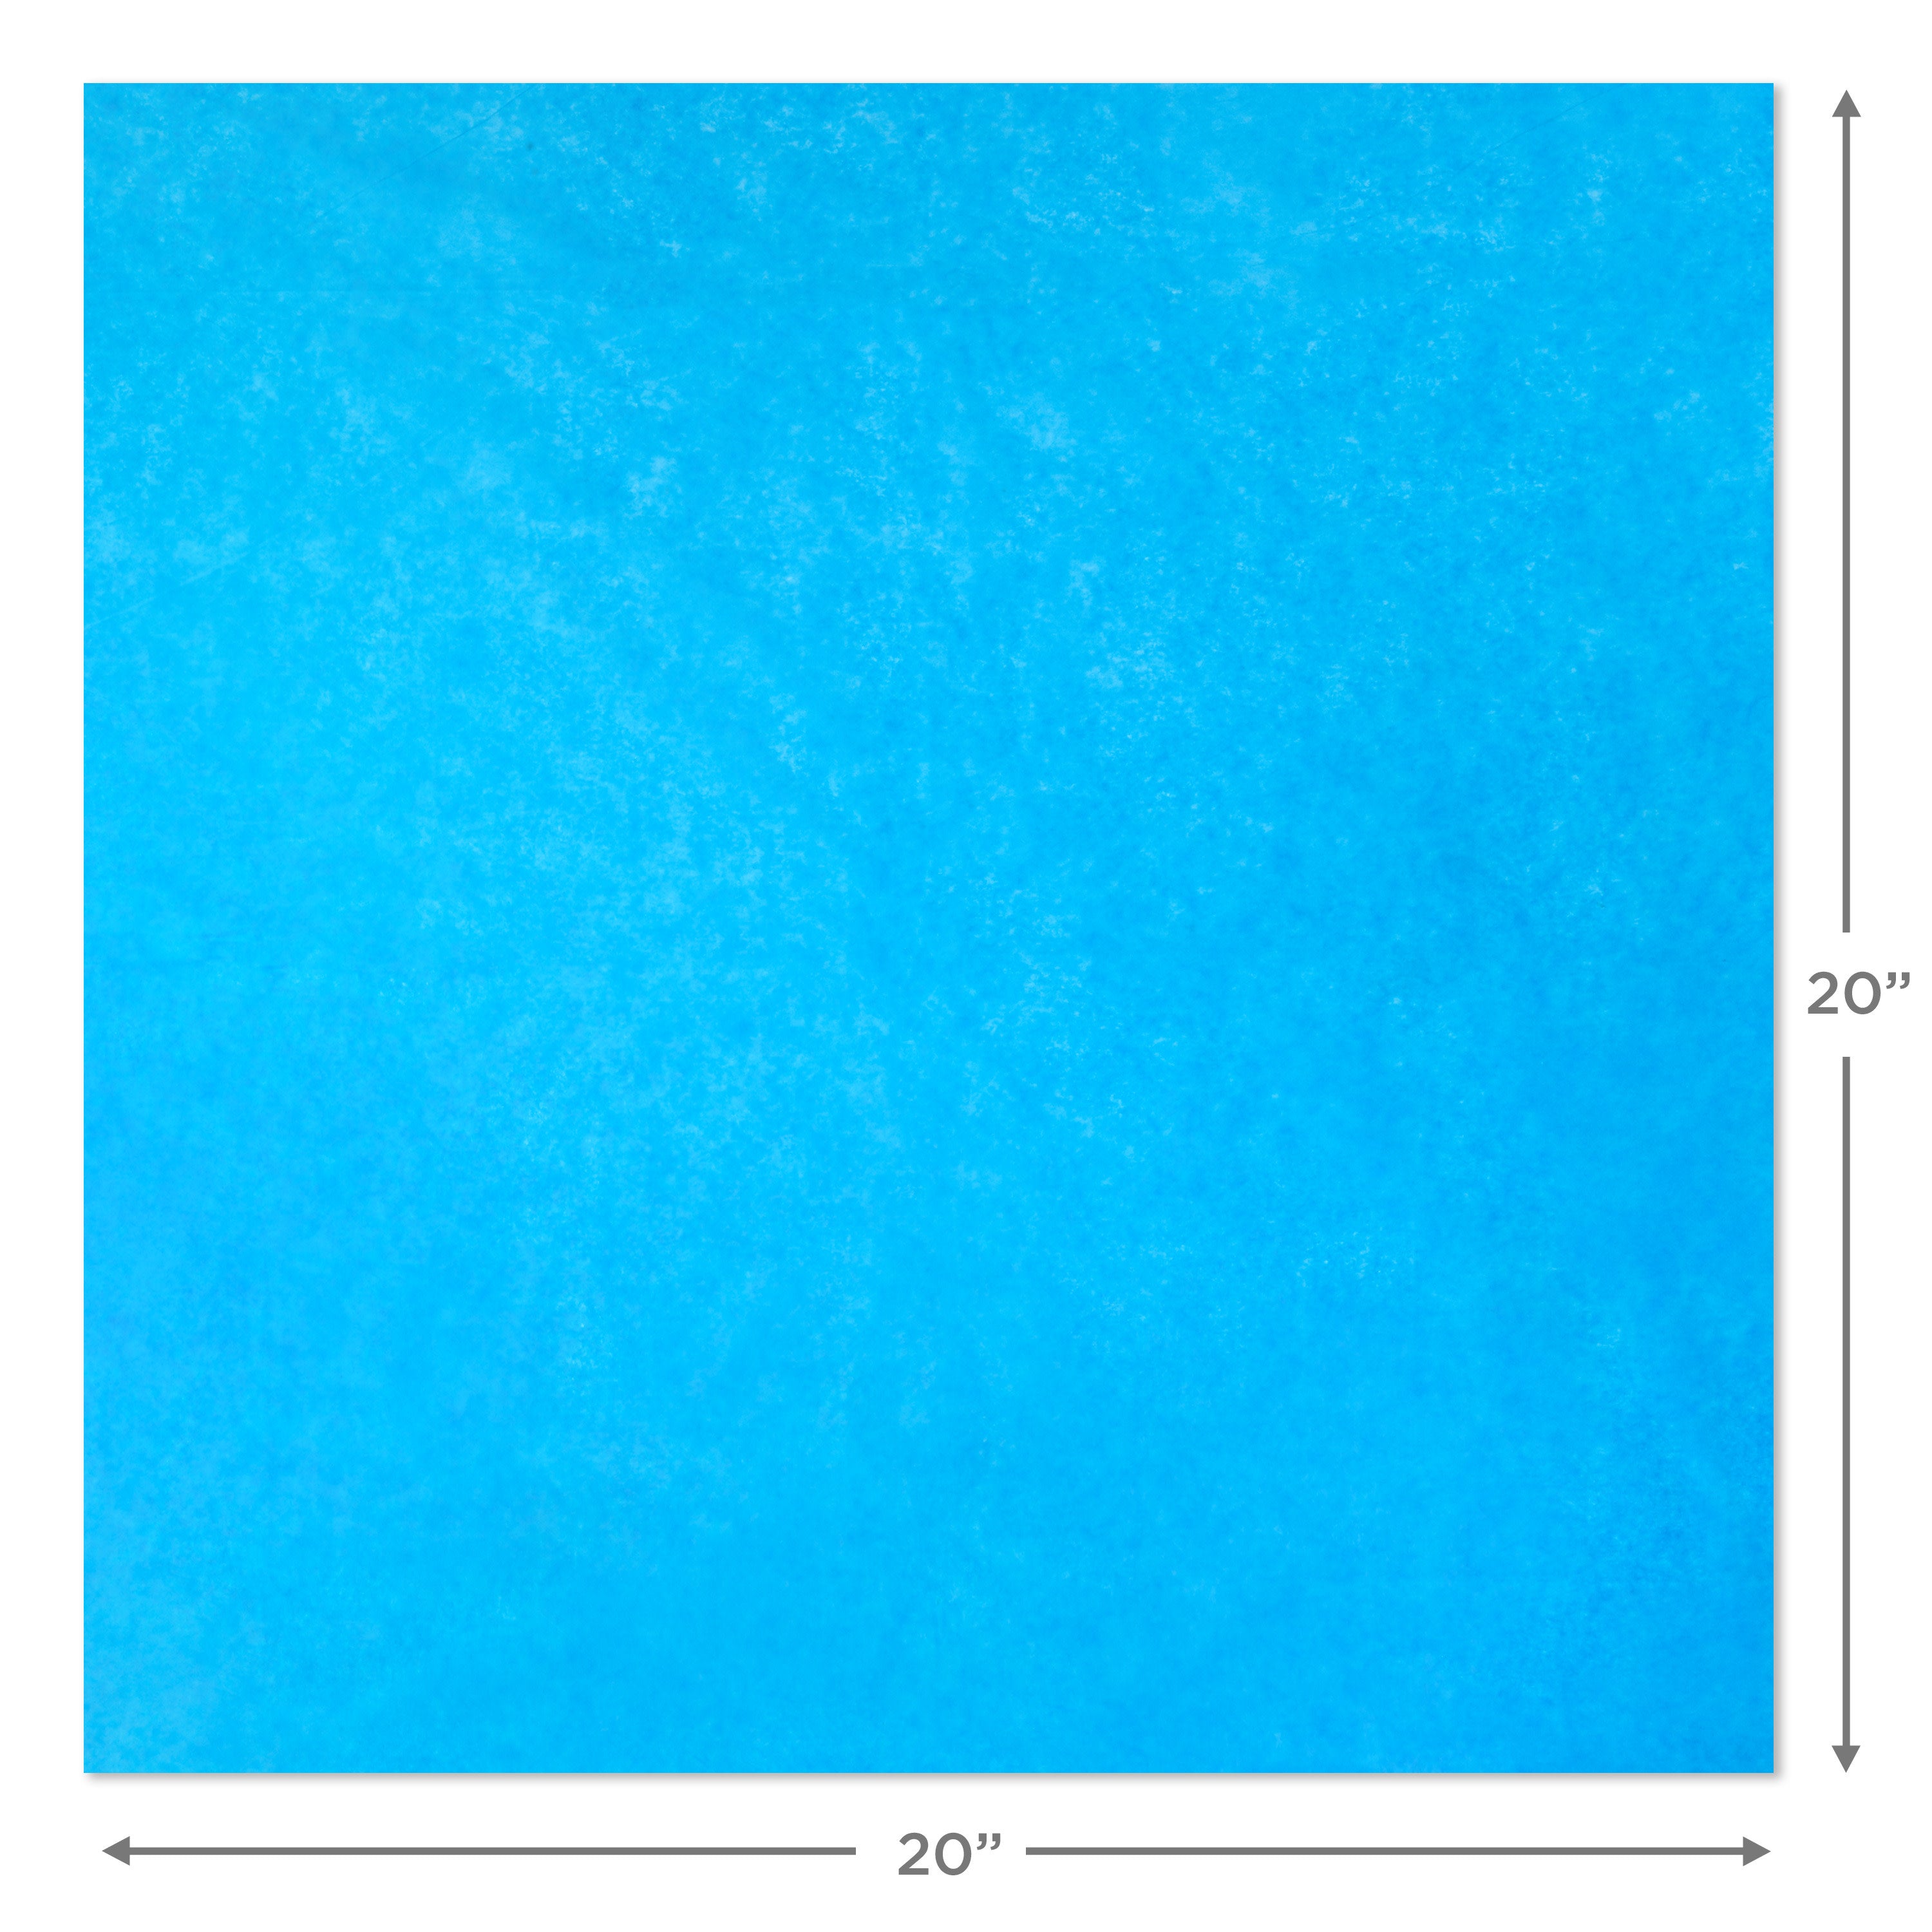 Hallmark Royal Blue, Turquoise and Light Blue Bulk Tissue Paper (90 Sheets) for Birthdays, Hanukkah, Father's Day, Baby Showers, Graduations